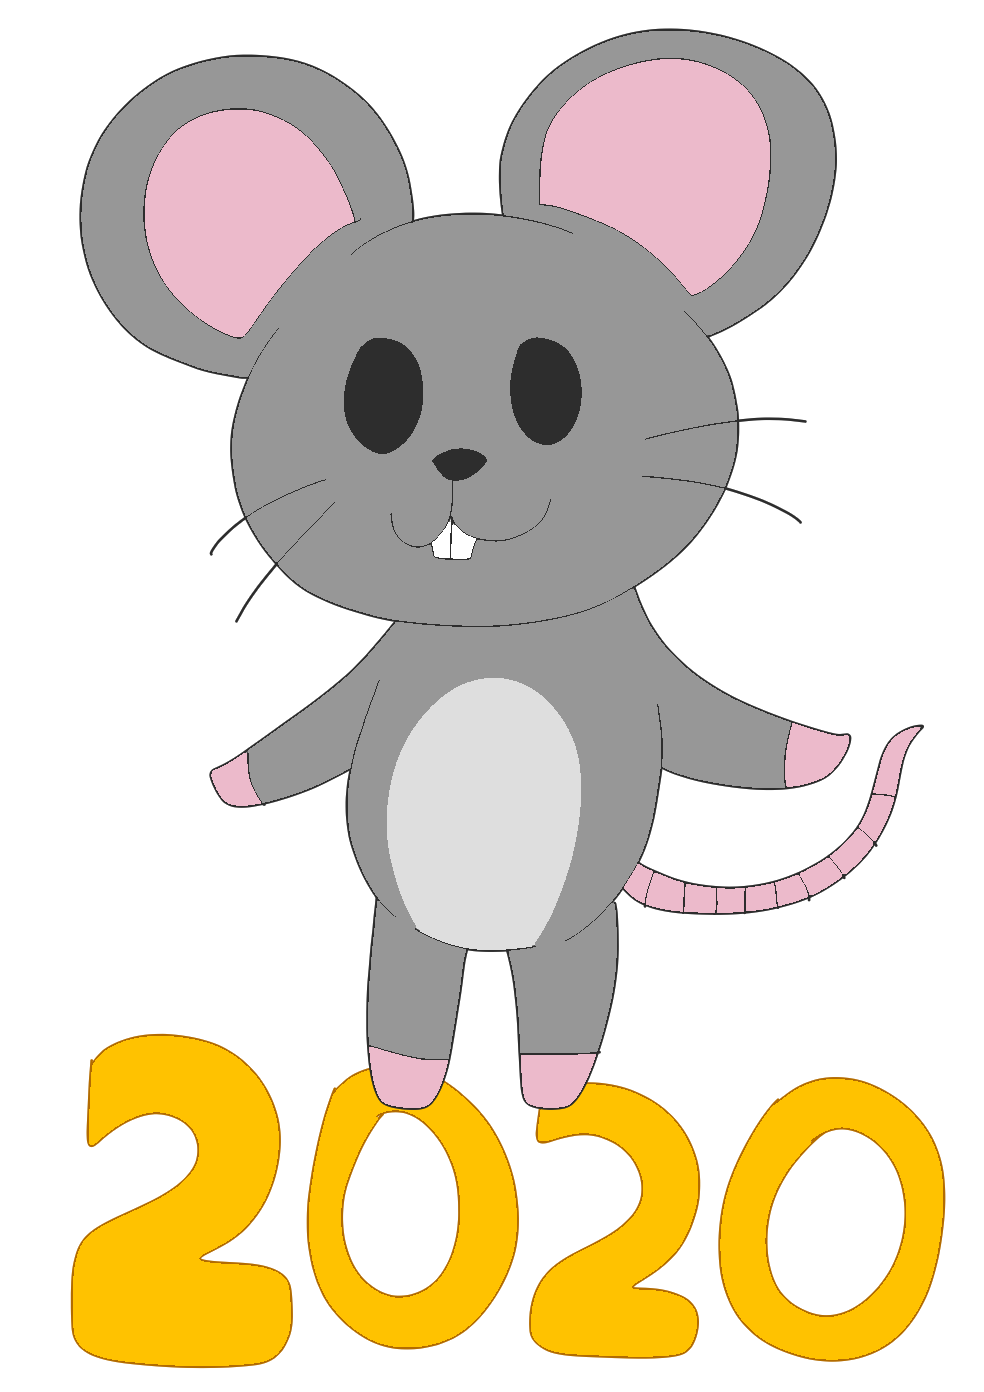 2020 is the year of the Rat